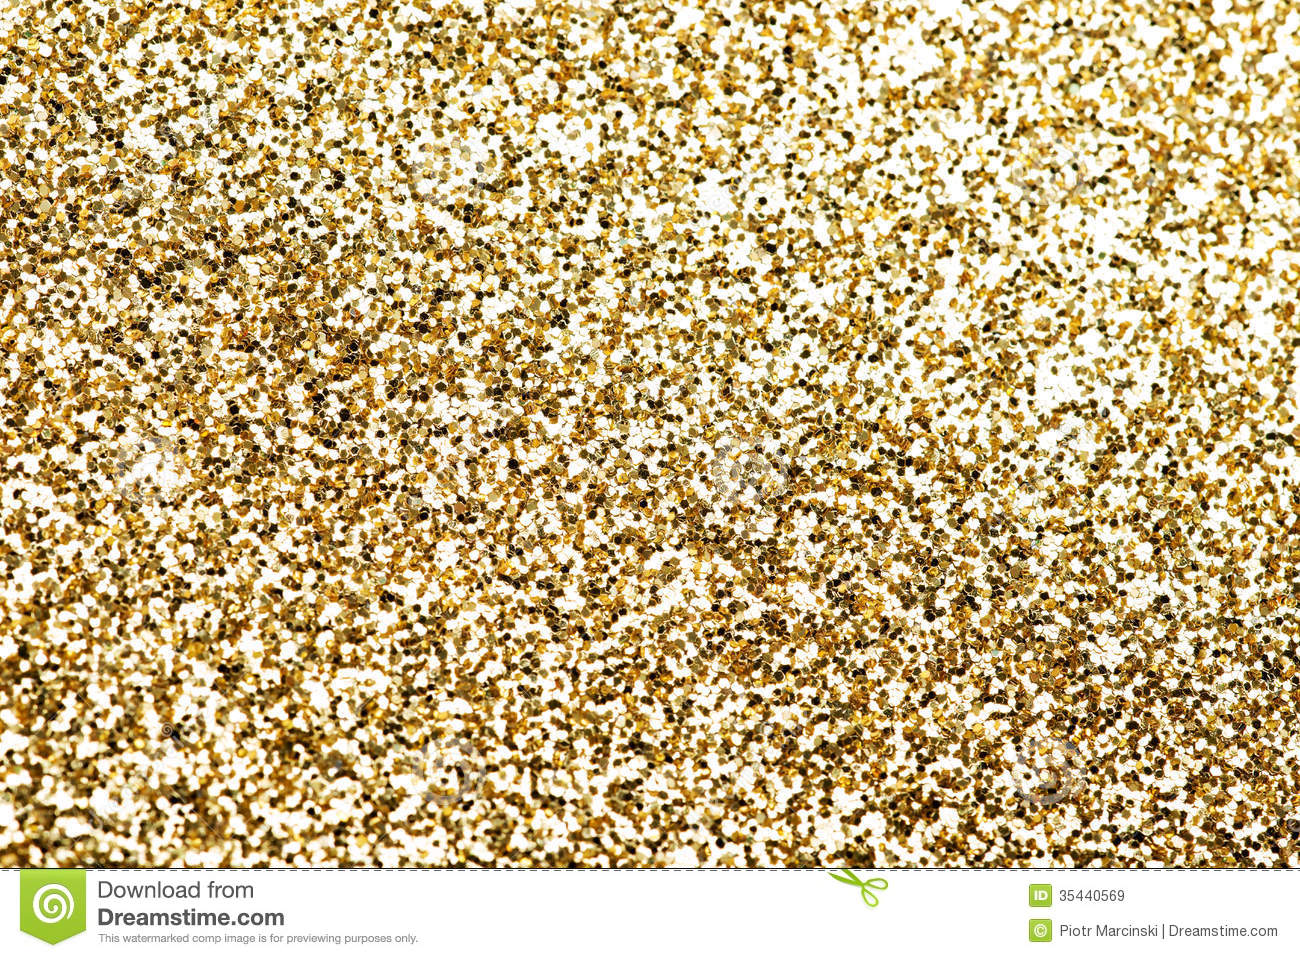 Gold Pieces Of Confetti  Royalty Free Stock Images   Image  35440569